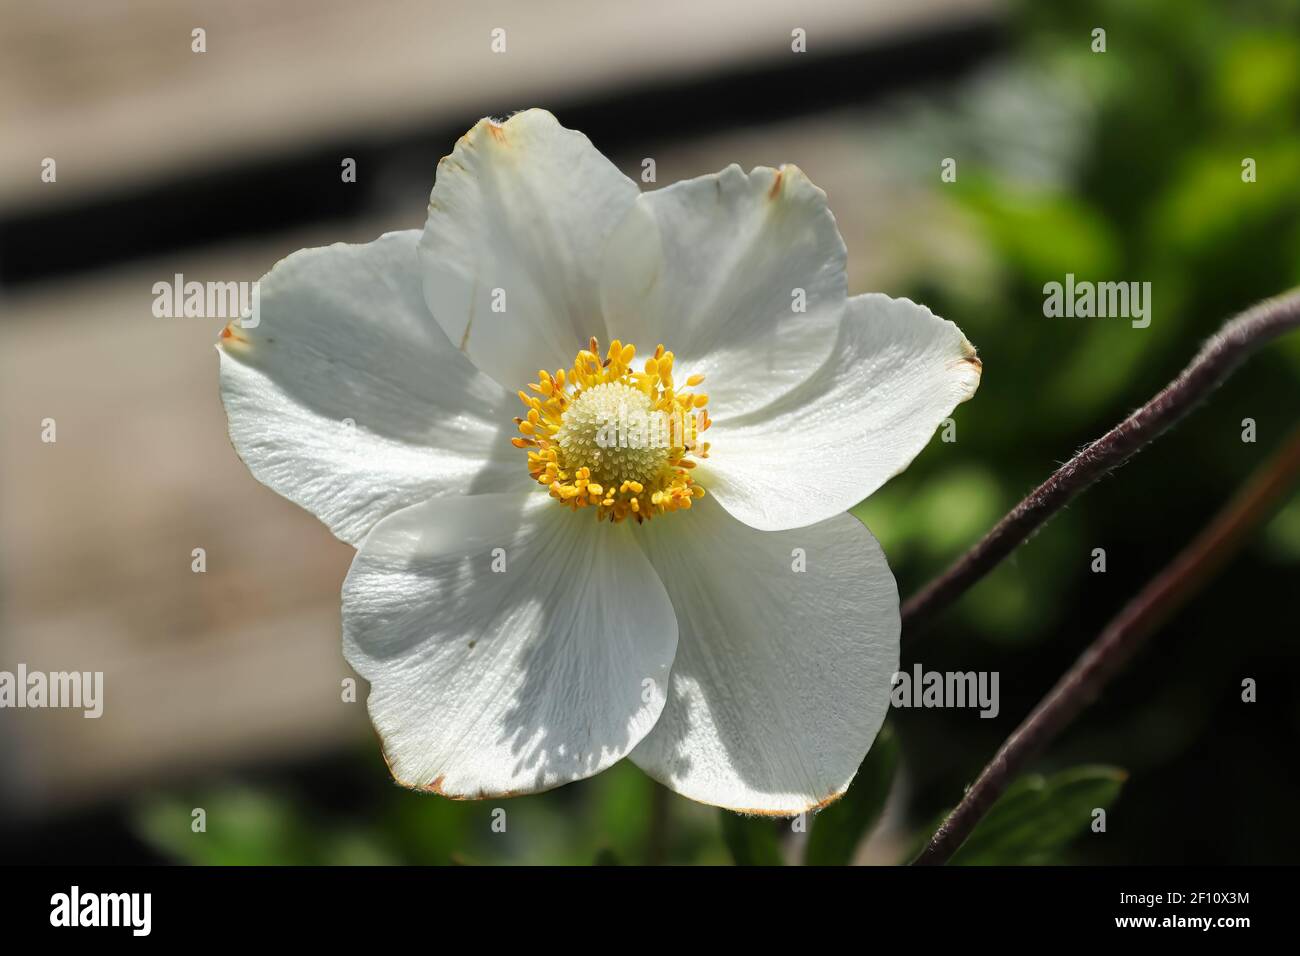 A white snowdrop anemone in bloom during summer Stock Photo